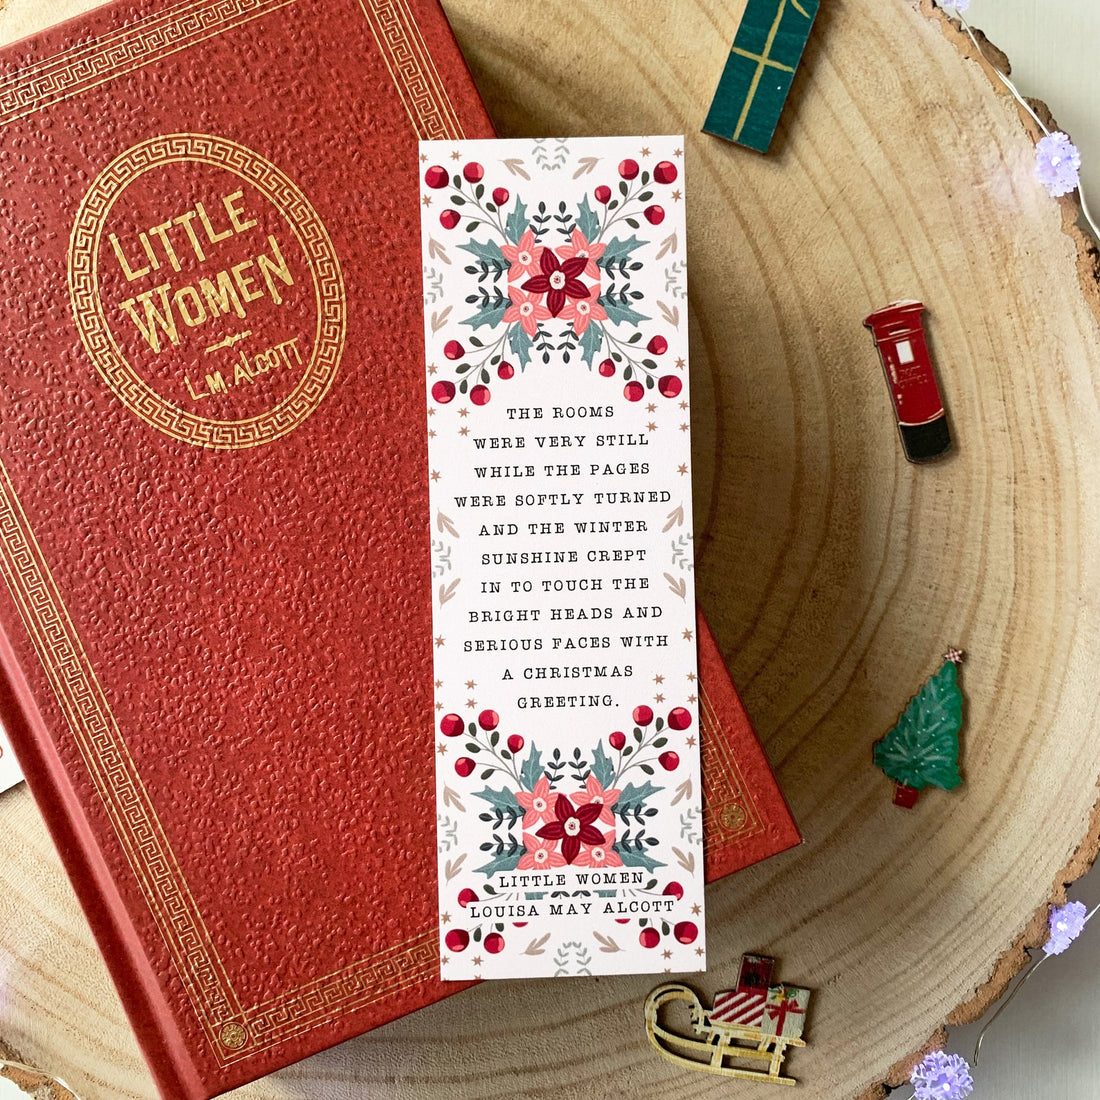 Festive Literary Quote Bookmarks